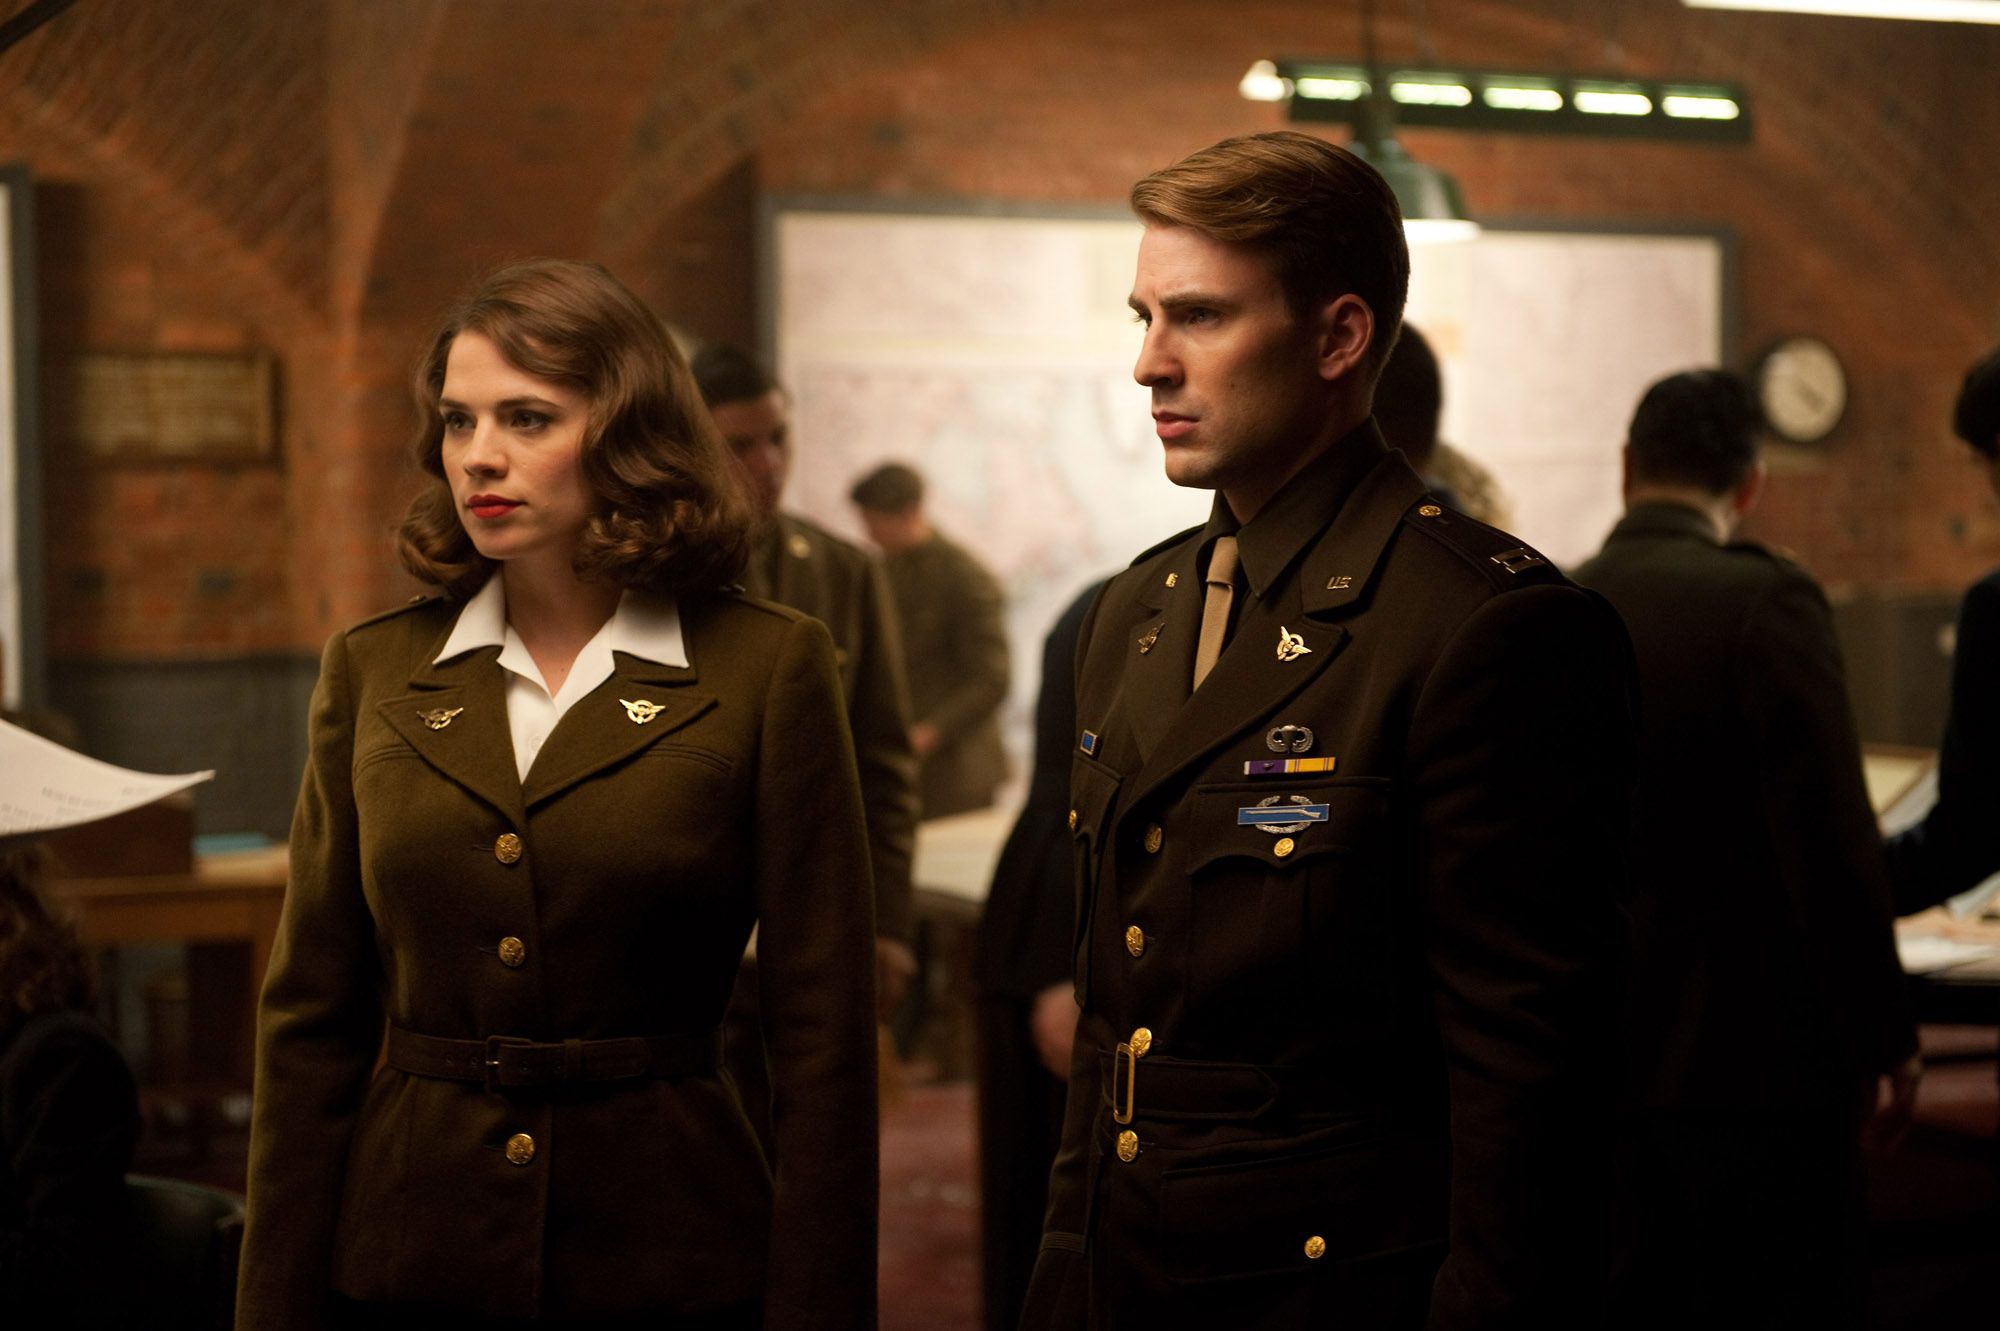 Hayley Atwell and Chris Evans in full military uniform